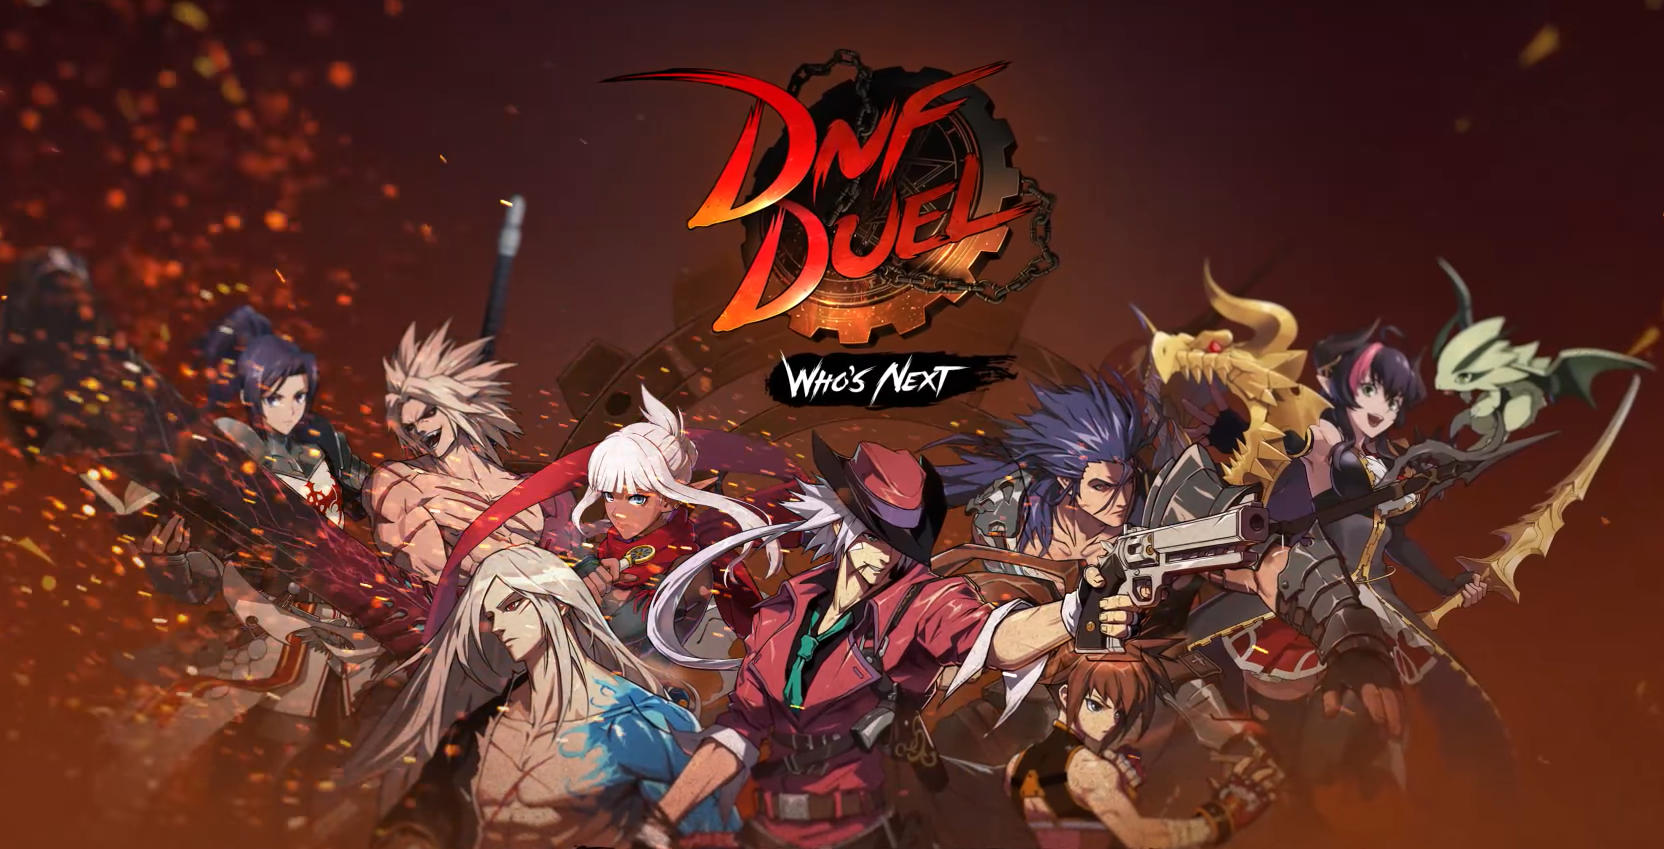 dnf duel free download free